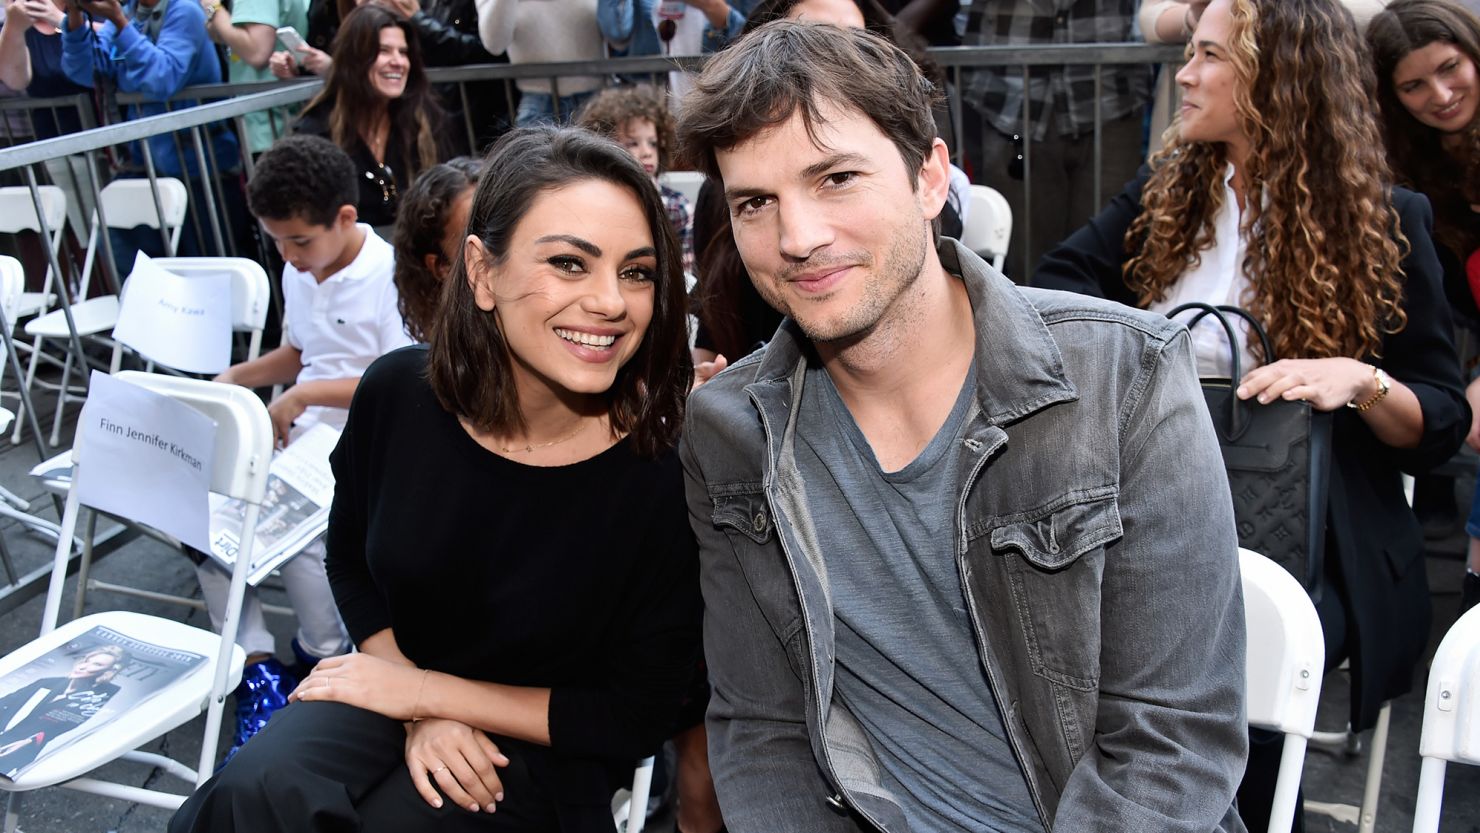 Actors Mila Kunis and Ashton Kutcher are listing their beach house on Airbnb.